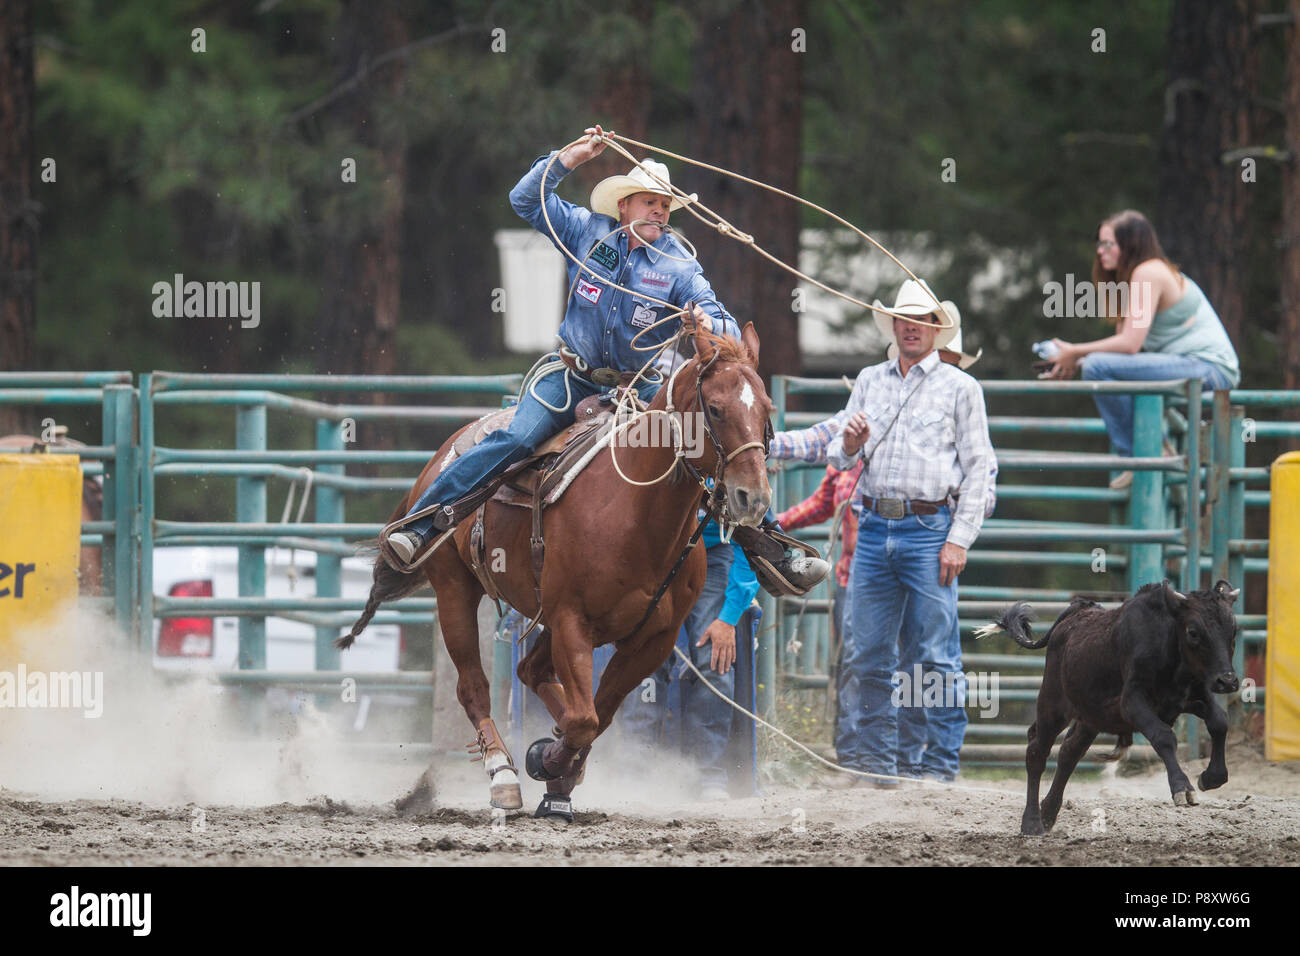 Tie Down Roping Rodeo Man Vs Calf In A Timed Event Exciting Speed As Cowboy Lasso S Fast Moving Calf Cranbrook Canada Stock Photo Alamy